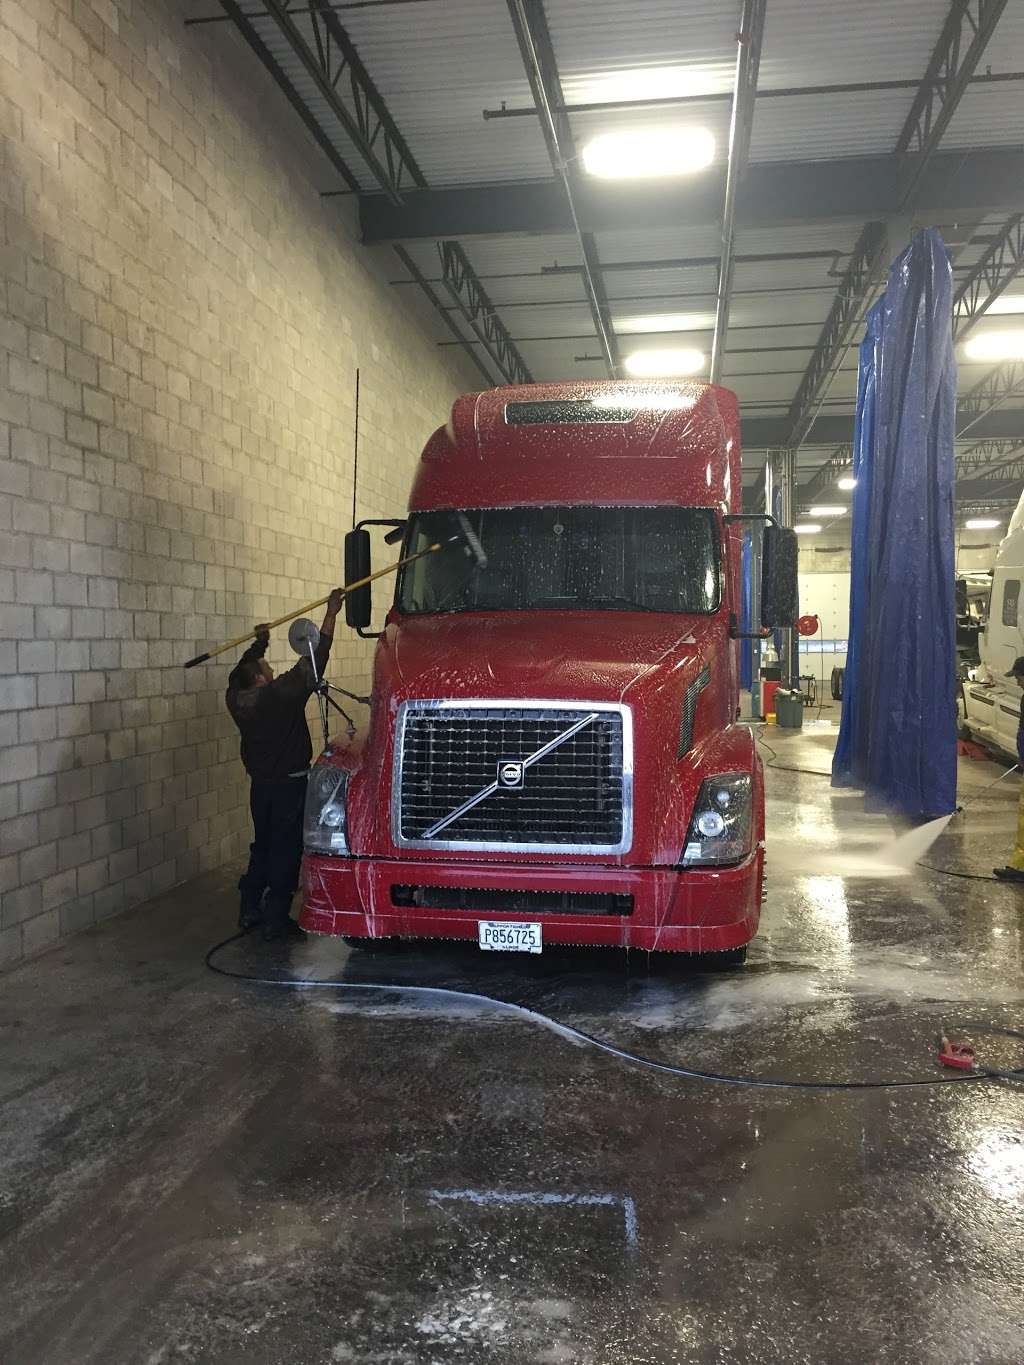 Dundee Truck Repair & Wash | 407 Christina Dr, East Dundee, IL 60118 | Phone: (224) 484-8182